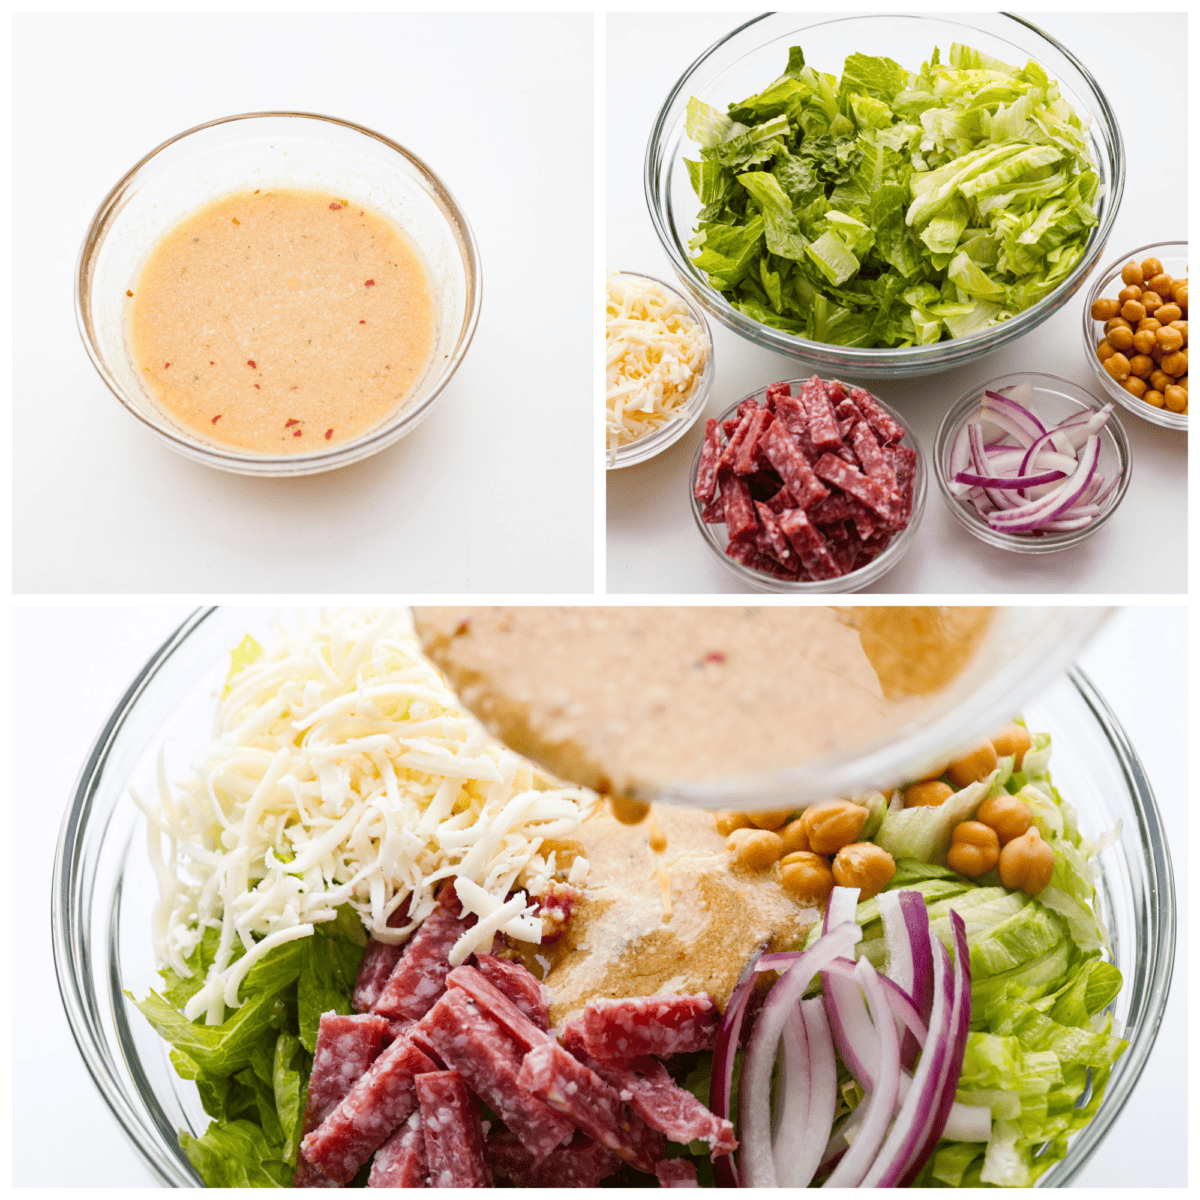 3-photo collage of the dressing and salad ingredients being prepared.